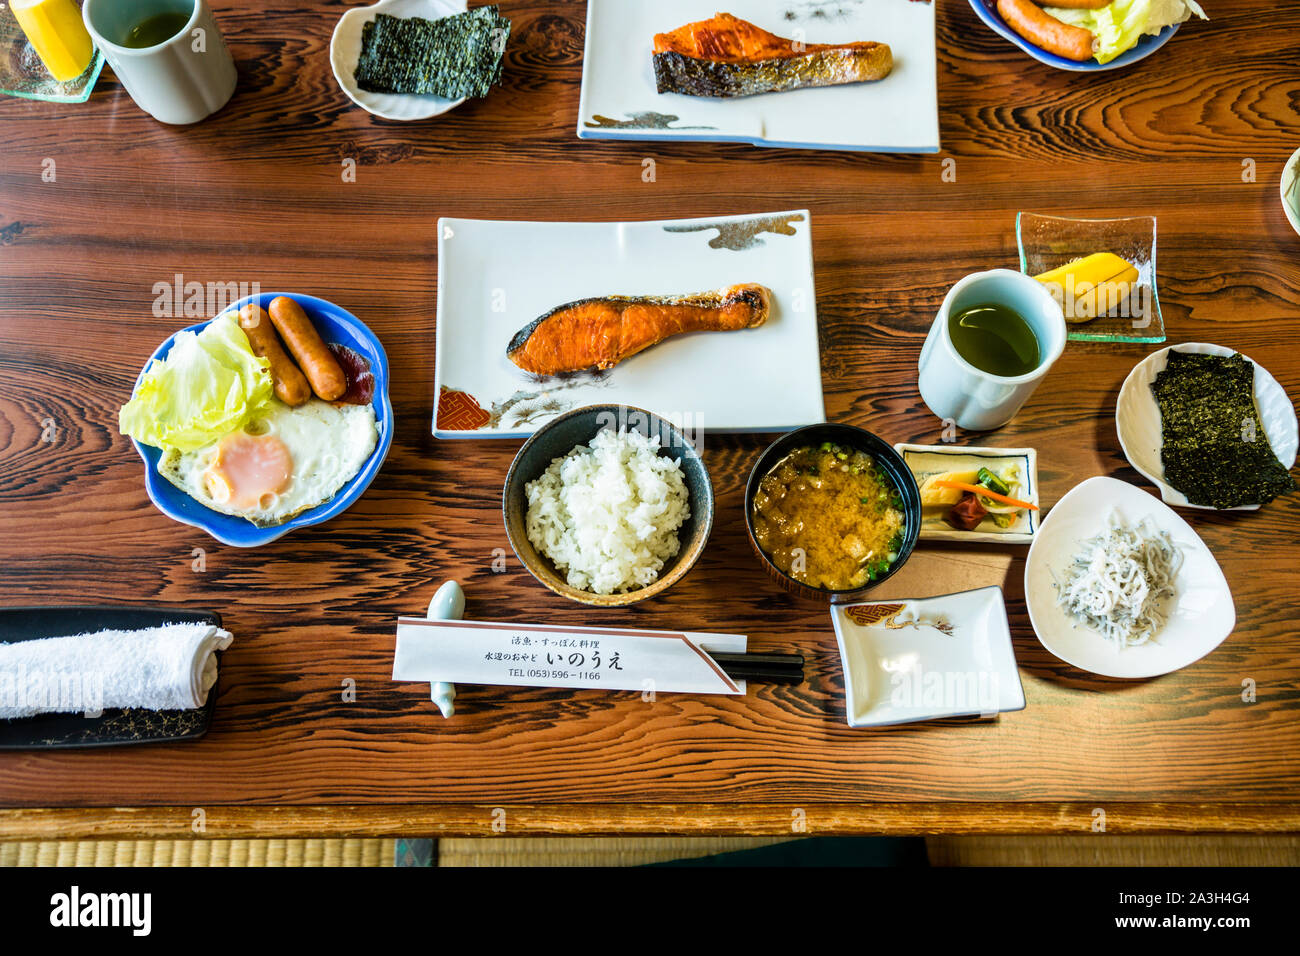 Typical Japanese breakfast with fish, seaweed and miso soup in Hamamatsu, Japan Stock Photo